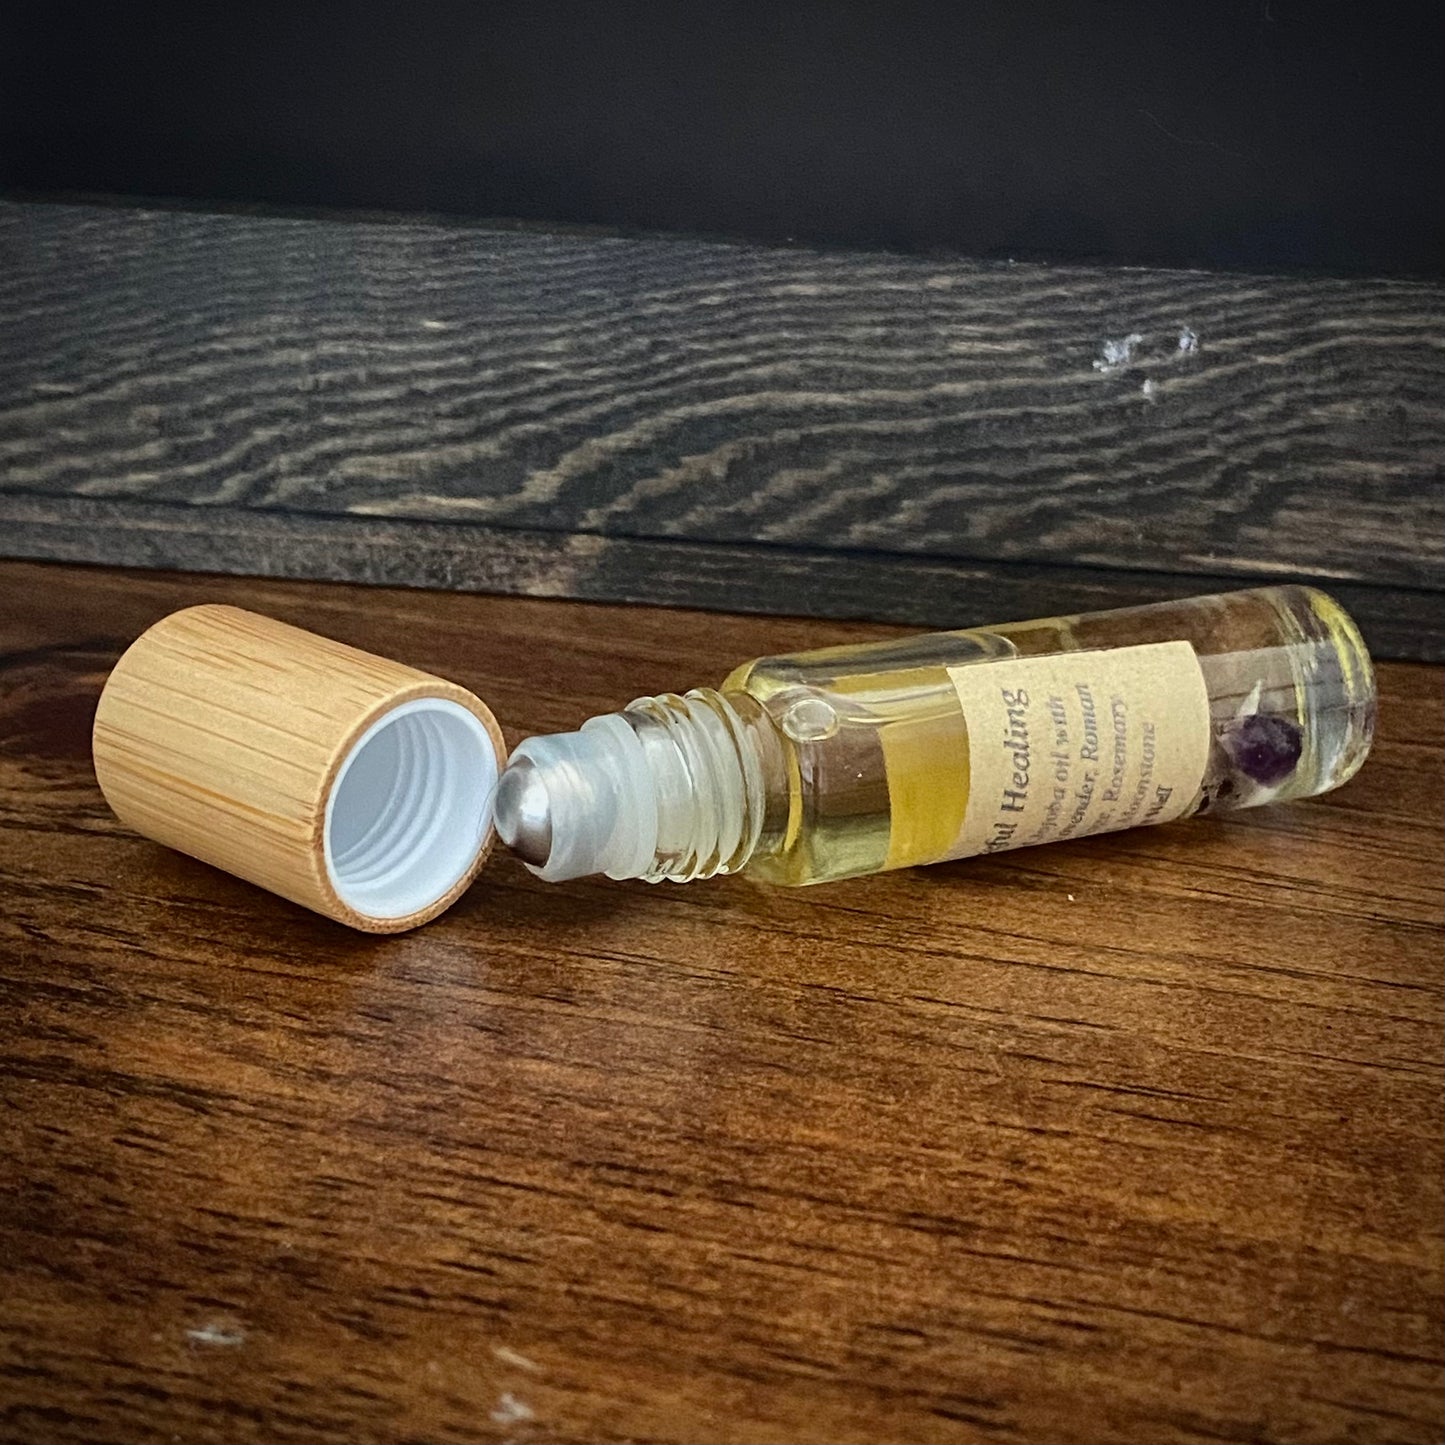 Essential Oil Roll-Ons